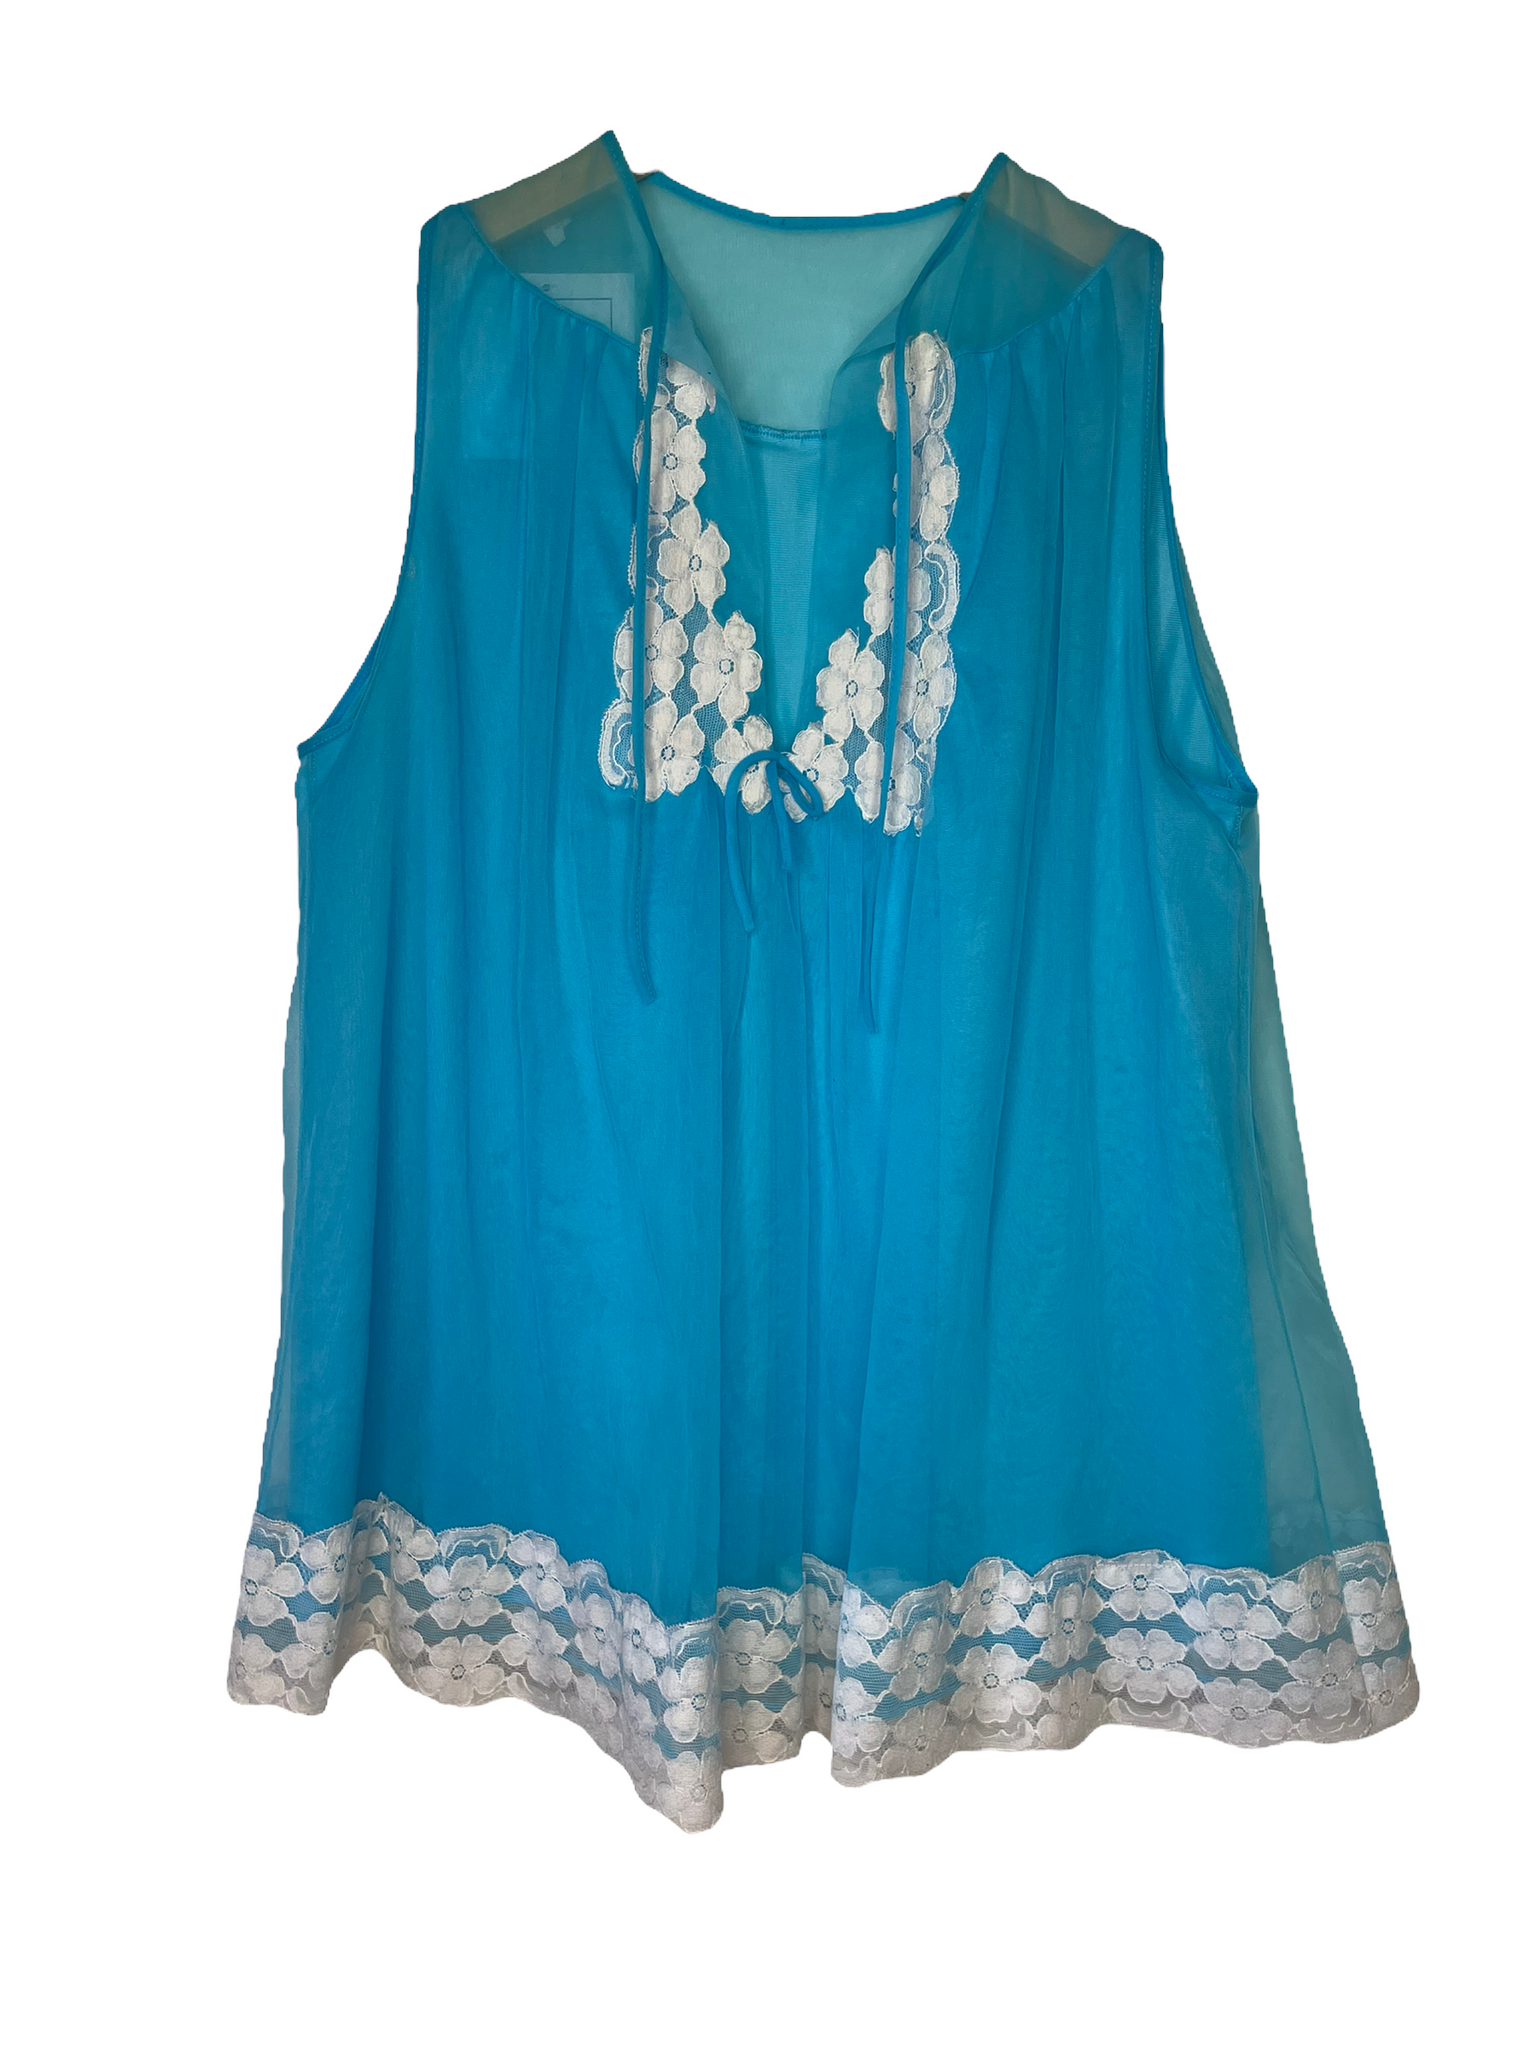 Vintage Blue Baby Doll Tank Top